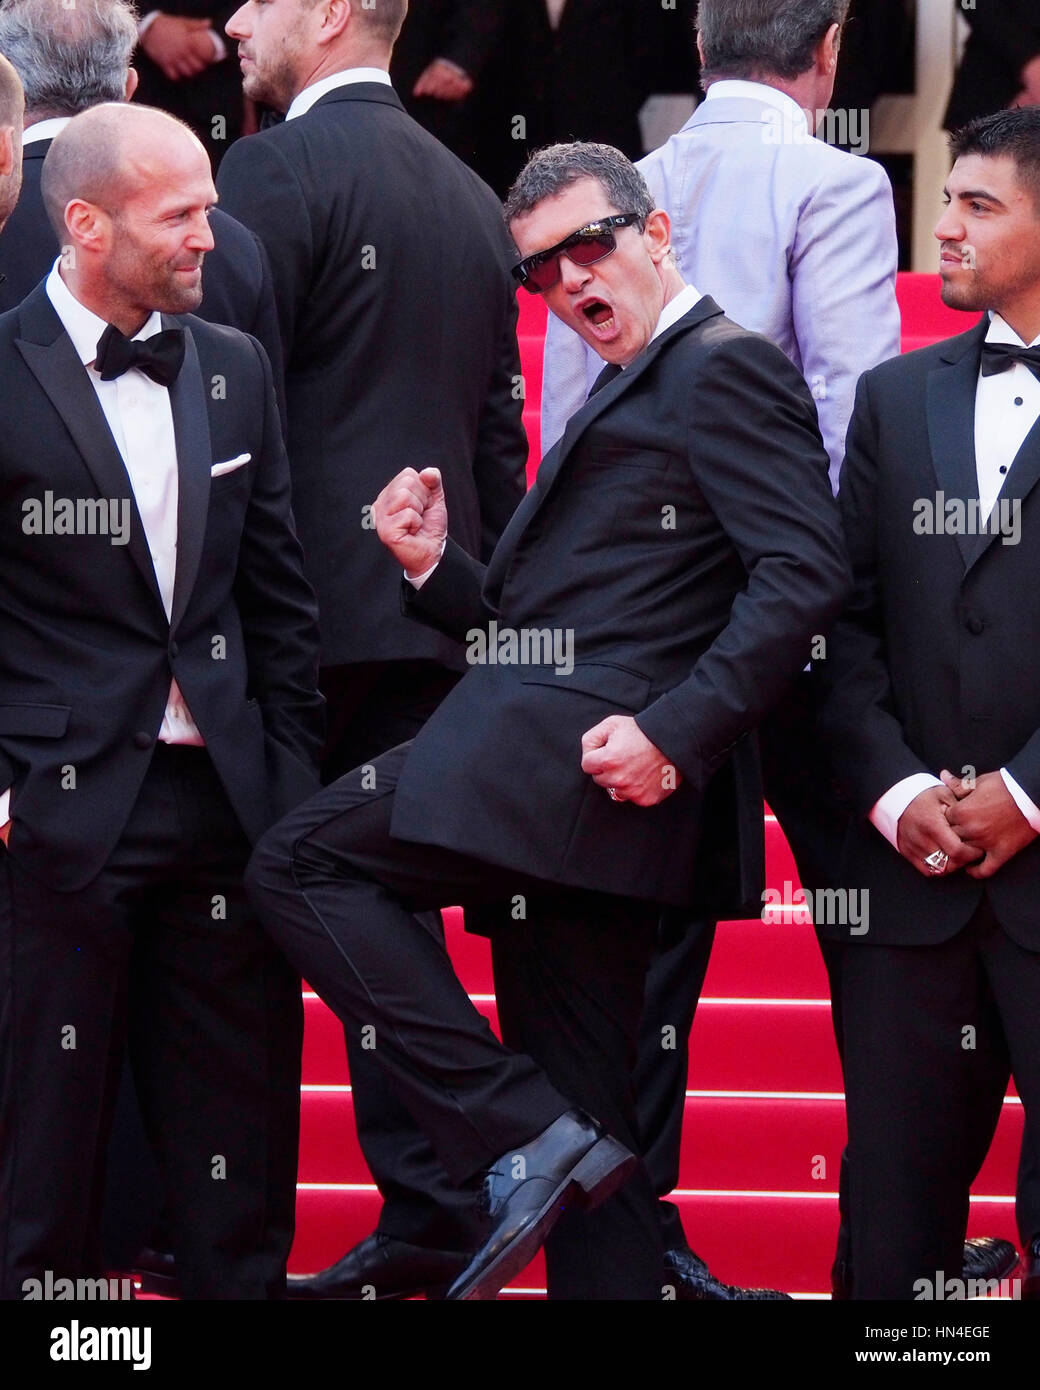 Antonio Banderas, kicks his leg up while Jason Stratham, left, and Victor Ortiz look on the red carpet at the Cannes Film Festival on May 18, 2014, in Cannes, France.  Photo by Francis Specker Stock Photo